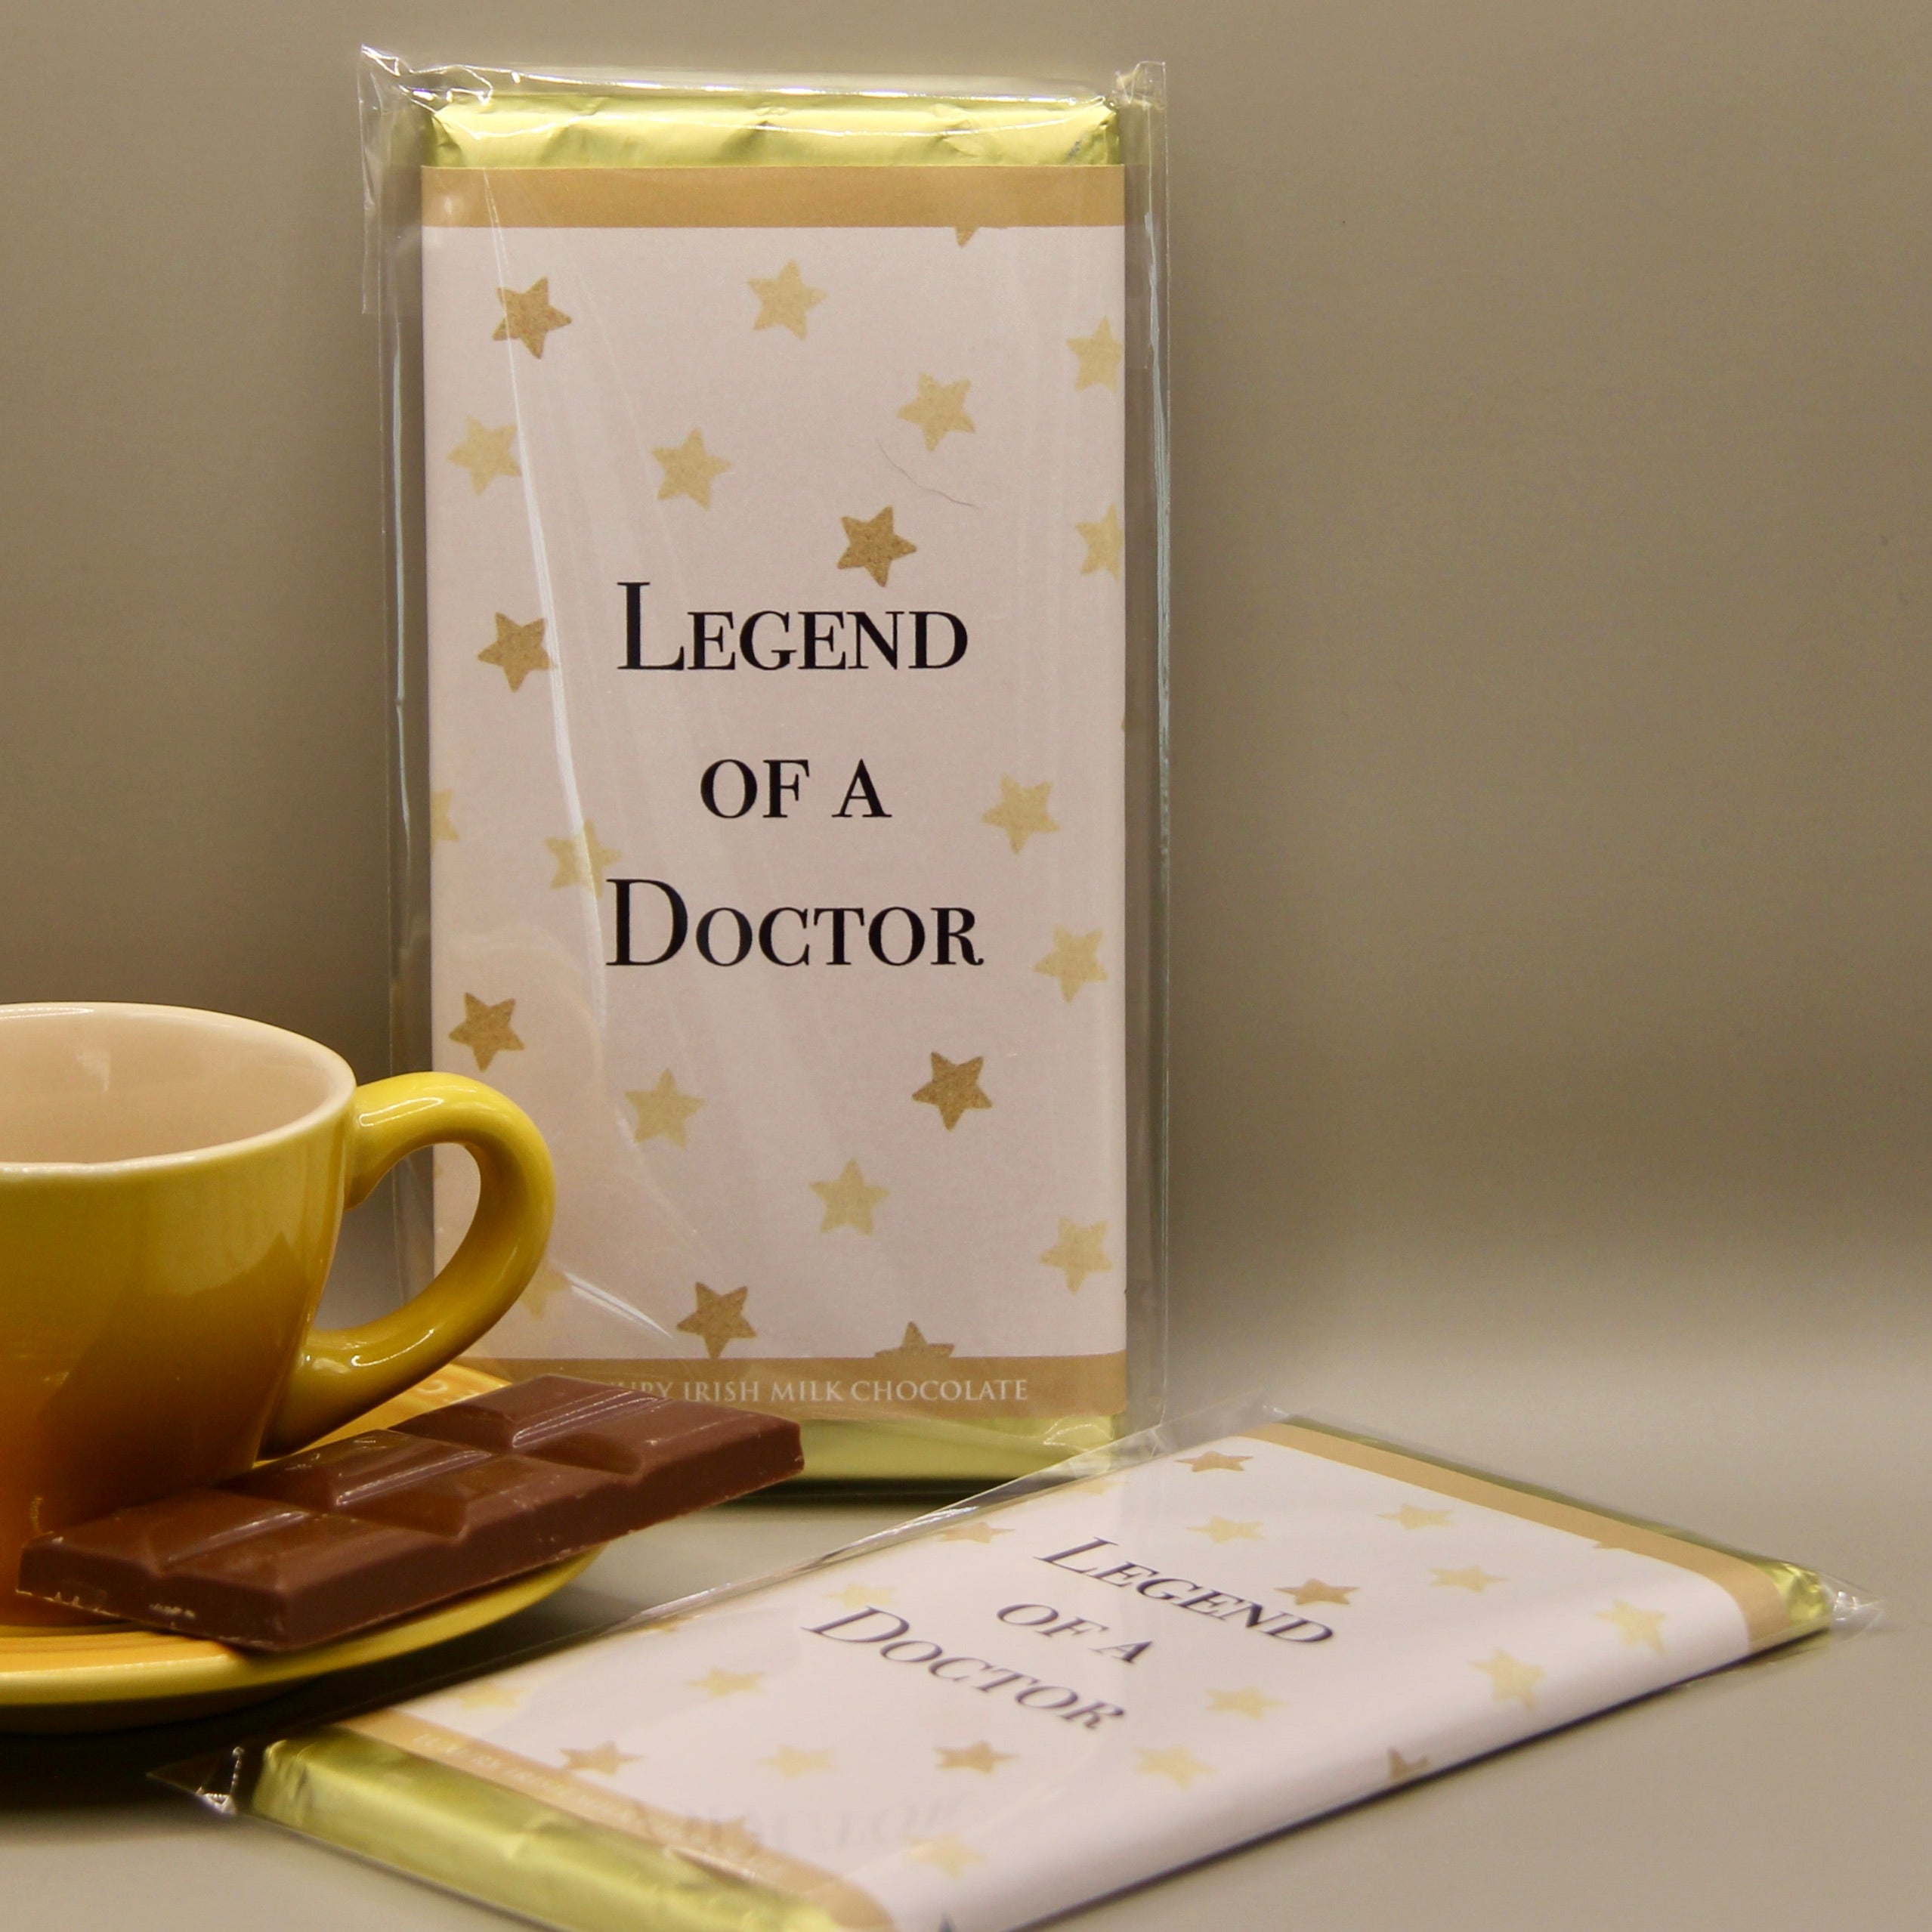 Legend of a doctor thank you bar of chocolatee